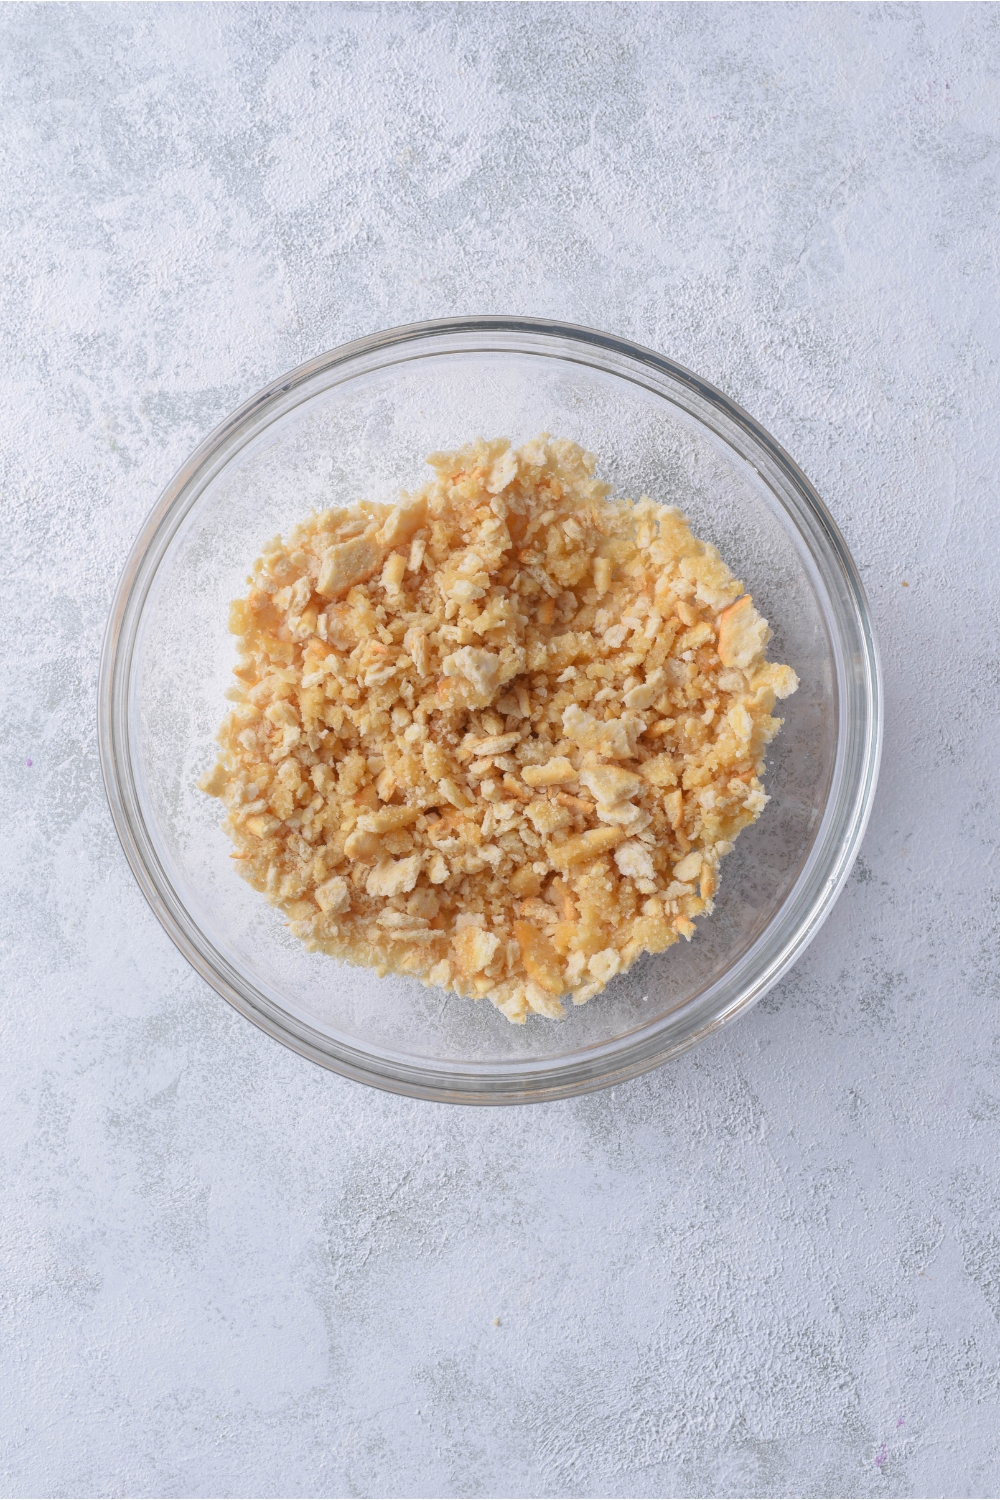 A clear bowl filled with cracker crumbs.